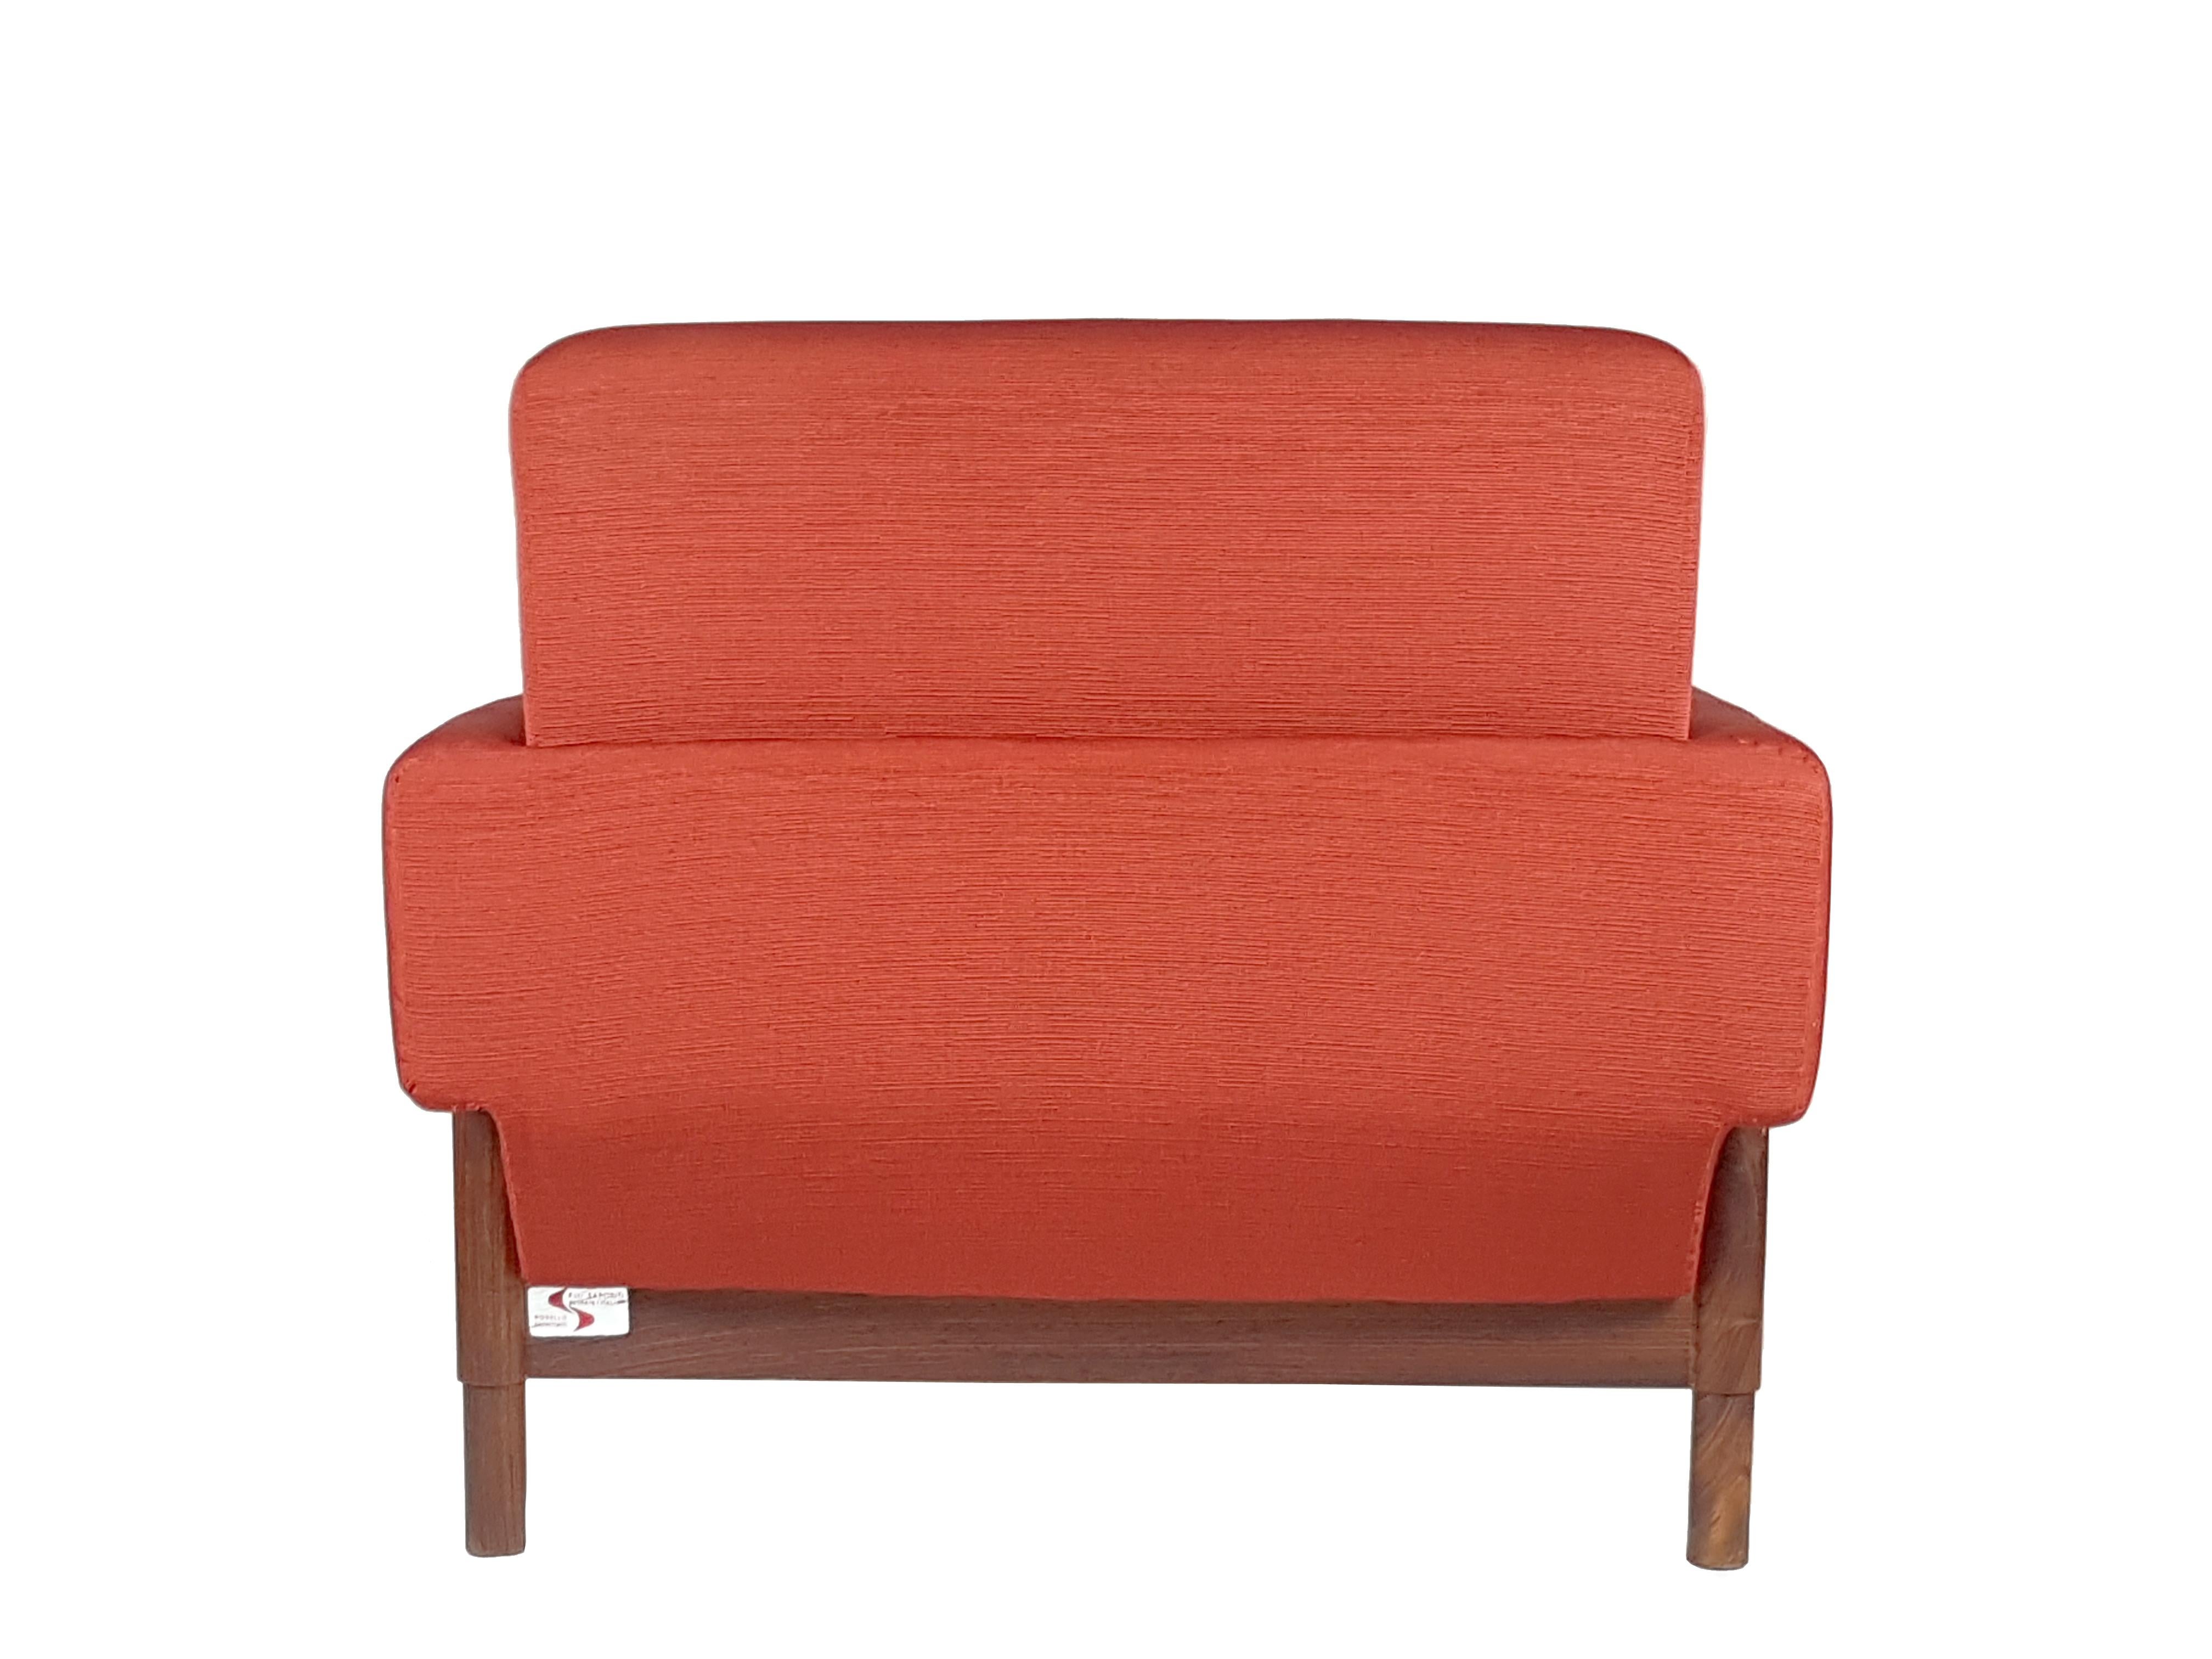 Pair of Wood & Brick Red Fabric 1960 Armchair by S. Saporiti for F.Lli Saporiti For Sale 4